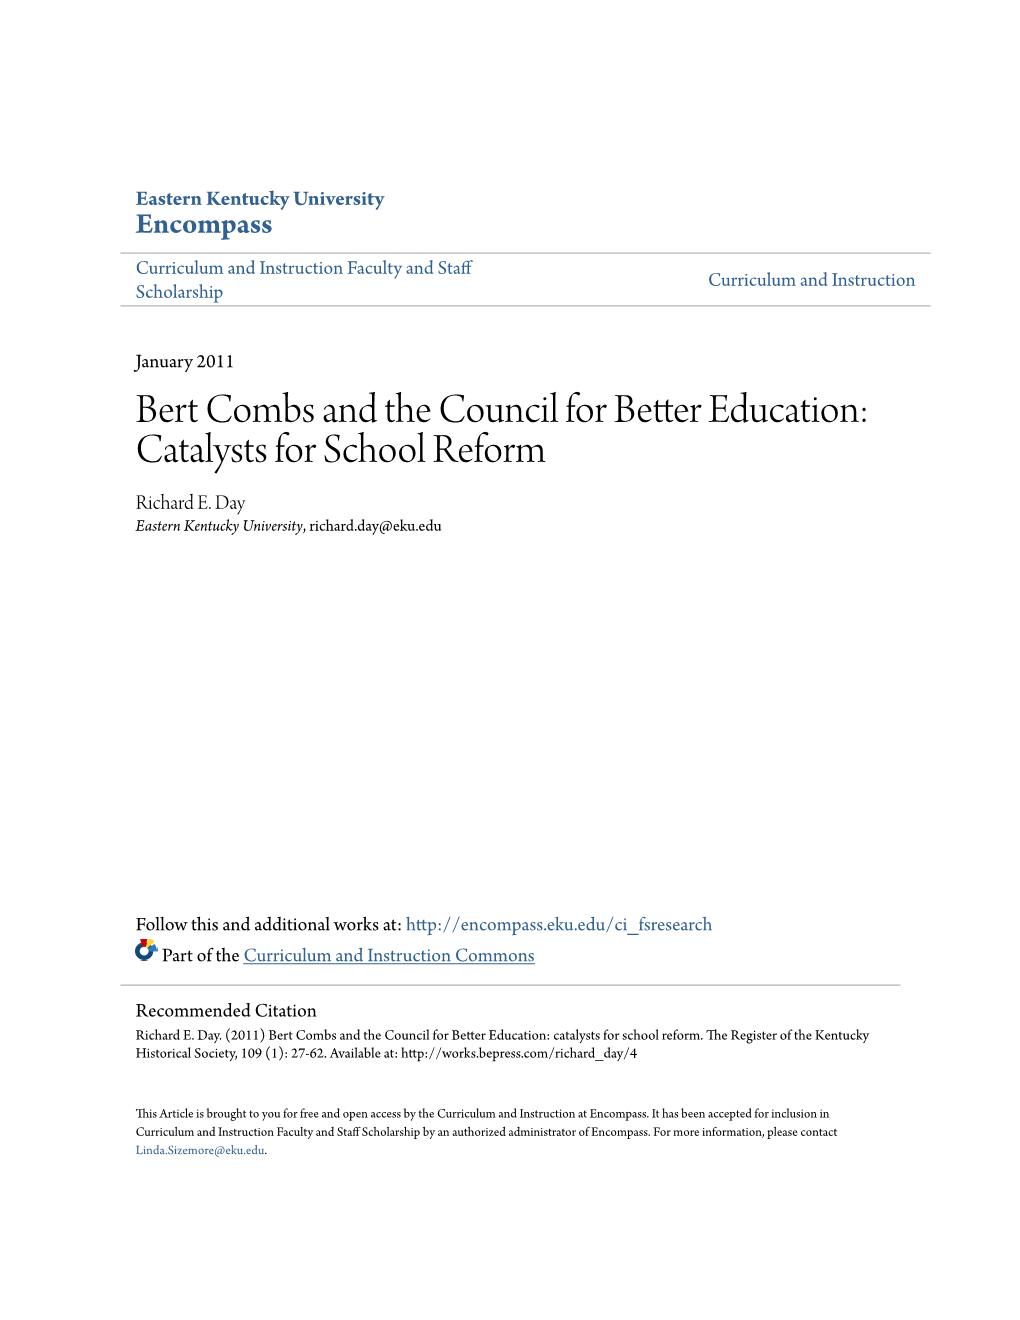 Bert Combs and the Council for Better Education: Catalysts for School Reform Richard E